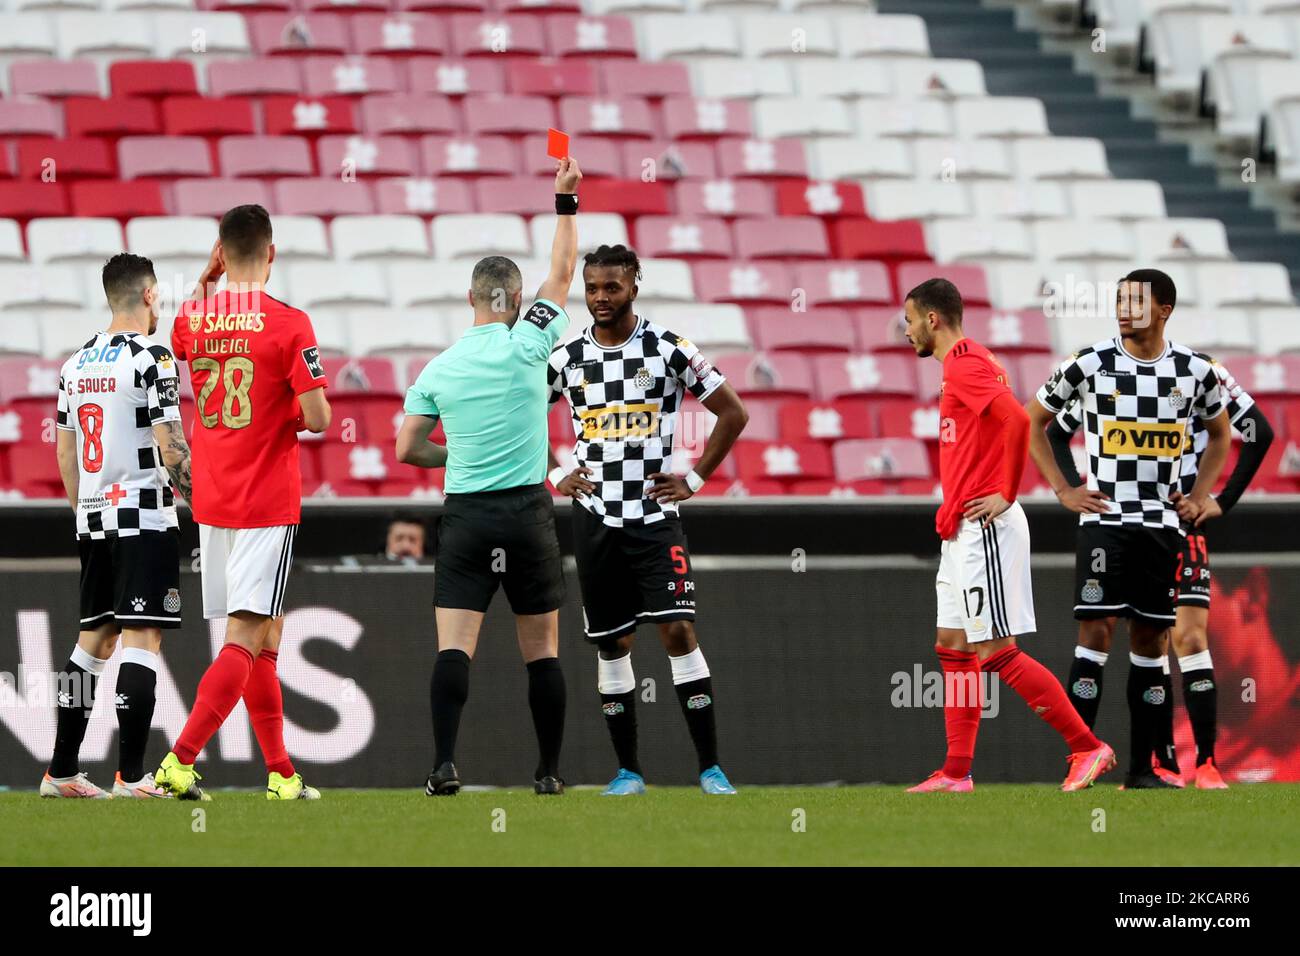 Referee Manuel Mota da Silva shows a red card to Chidozie Awaziem of Boavista FC during the Portuguese League football match between SL Benfica and Boavista FC at the Luz stadium in Lisbon, Portugal on March 13, 2021. (Photo by Pedro FiÃºza/NurPhoto) Stock Photo